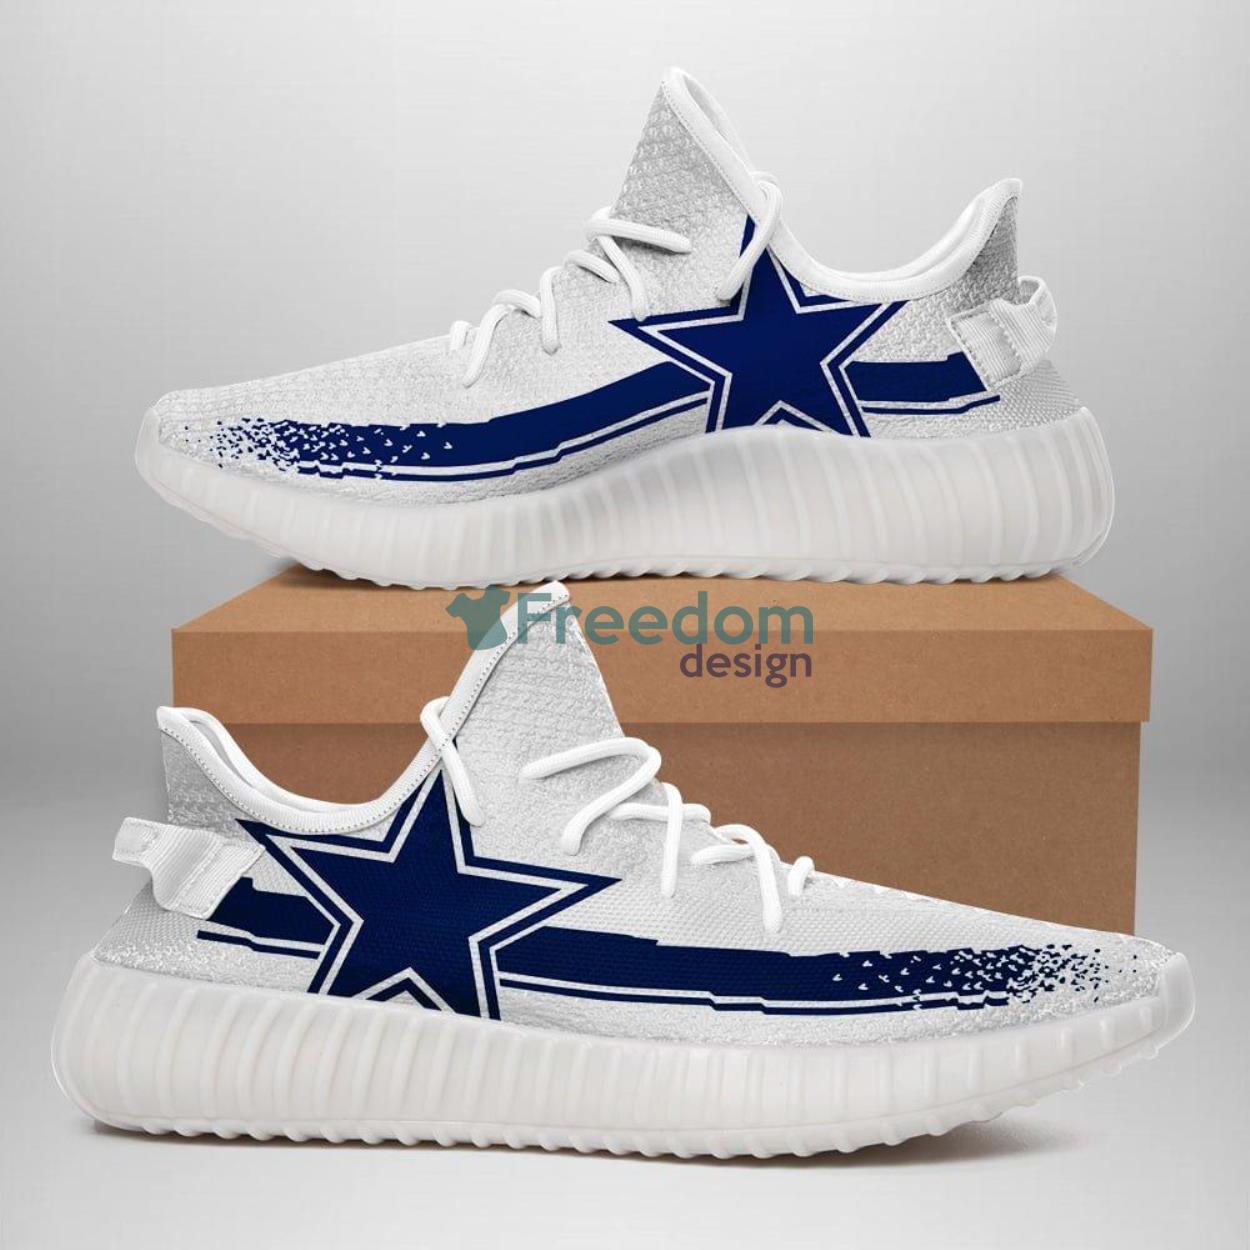 Dallas Cowboys Team Sport Lover Yeezy Shoes Product Photo 1